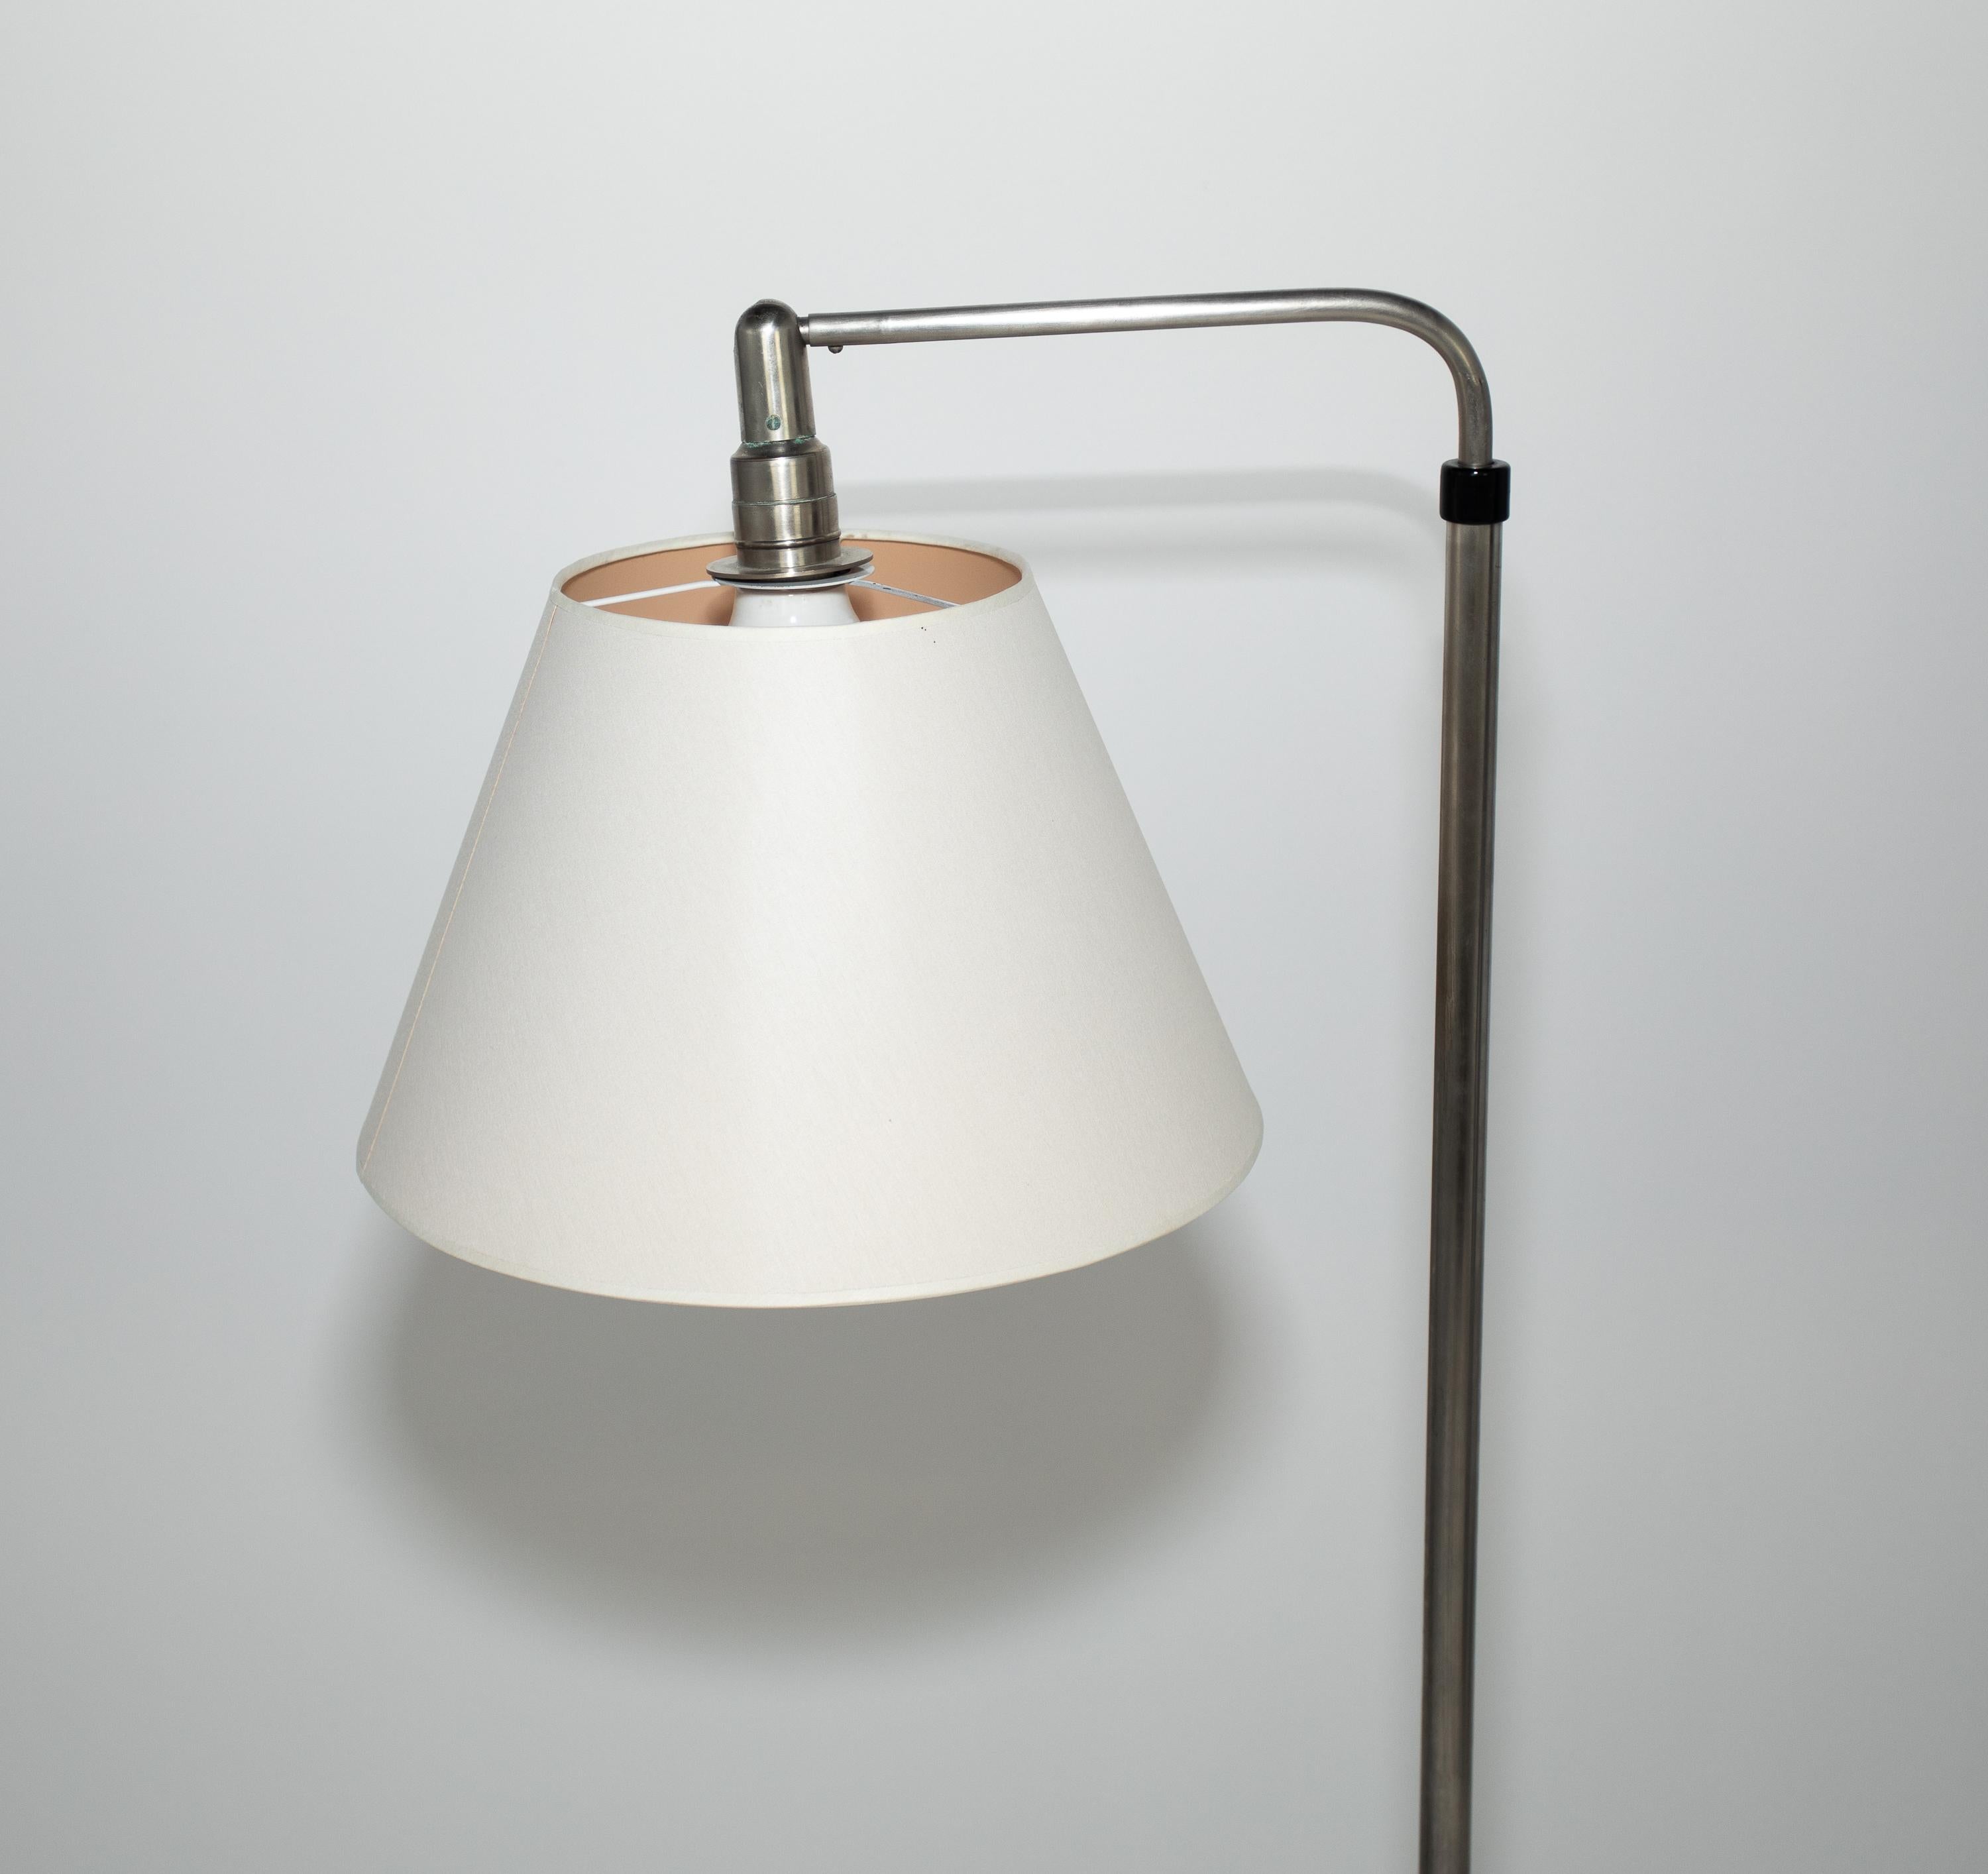 Sigfried Giedion Telescoping and pivoting floor lamp.
Manufactured by B.A.G.Turgi